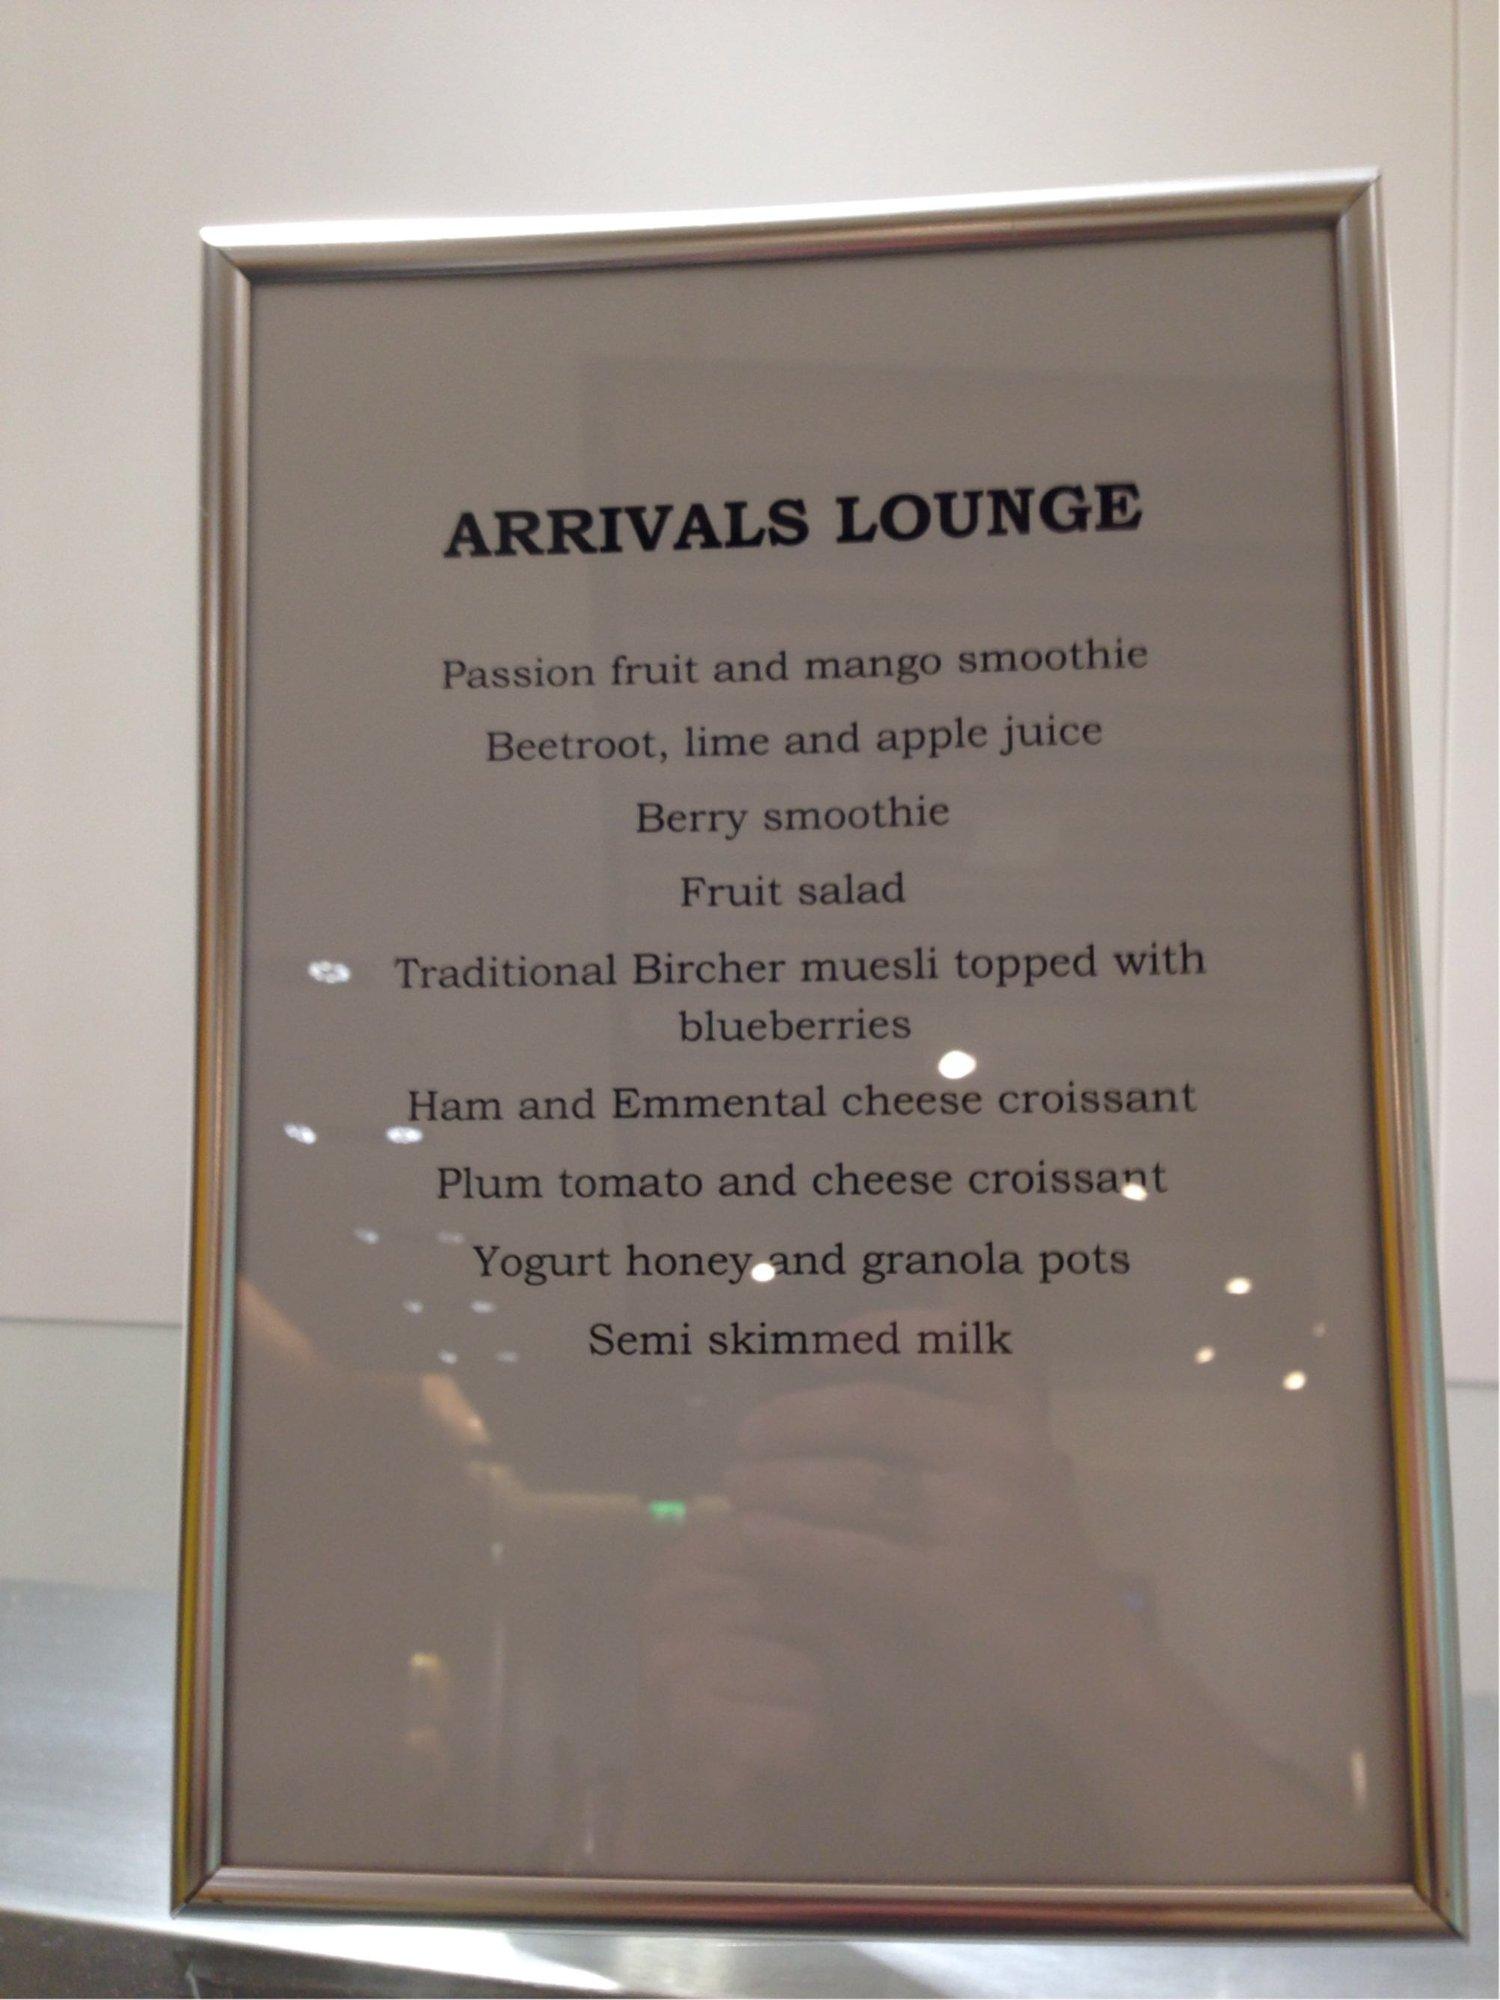 United Airlines Arrivals Lounge image 2 of 9